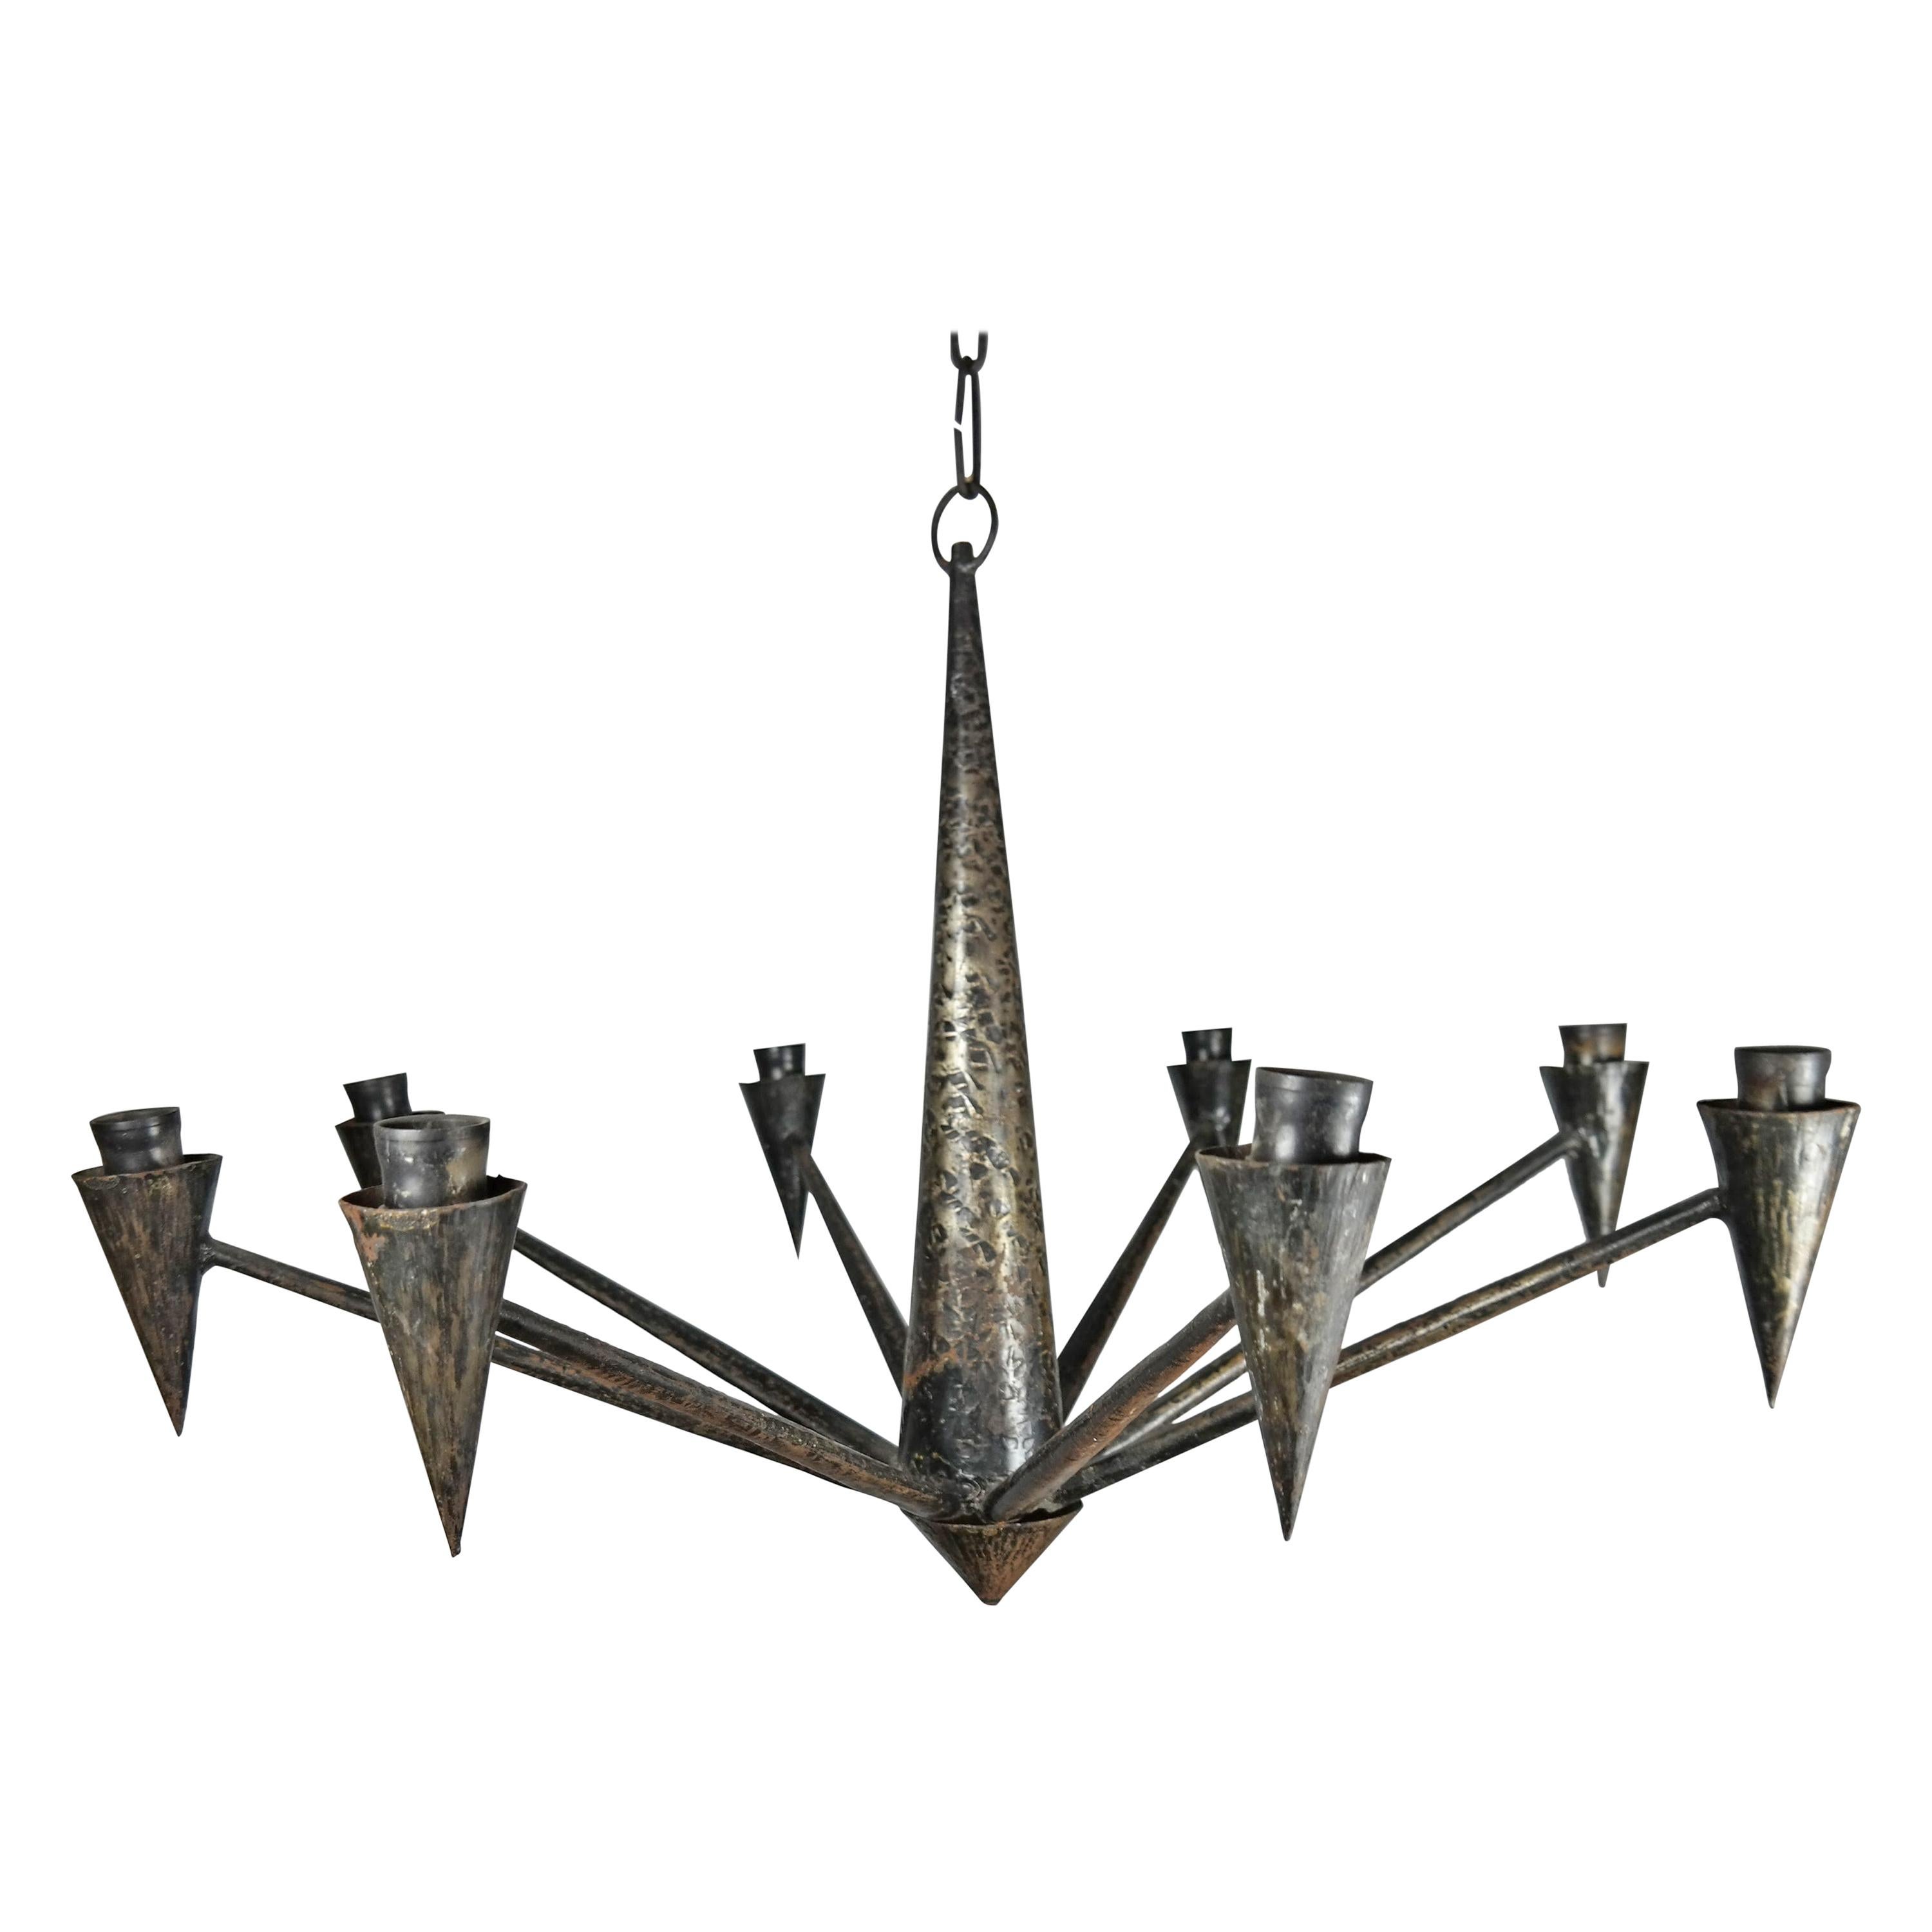 1970s Handmade Patinated Iron Chandelier, with 8 Arms